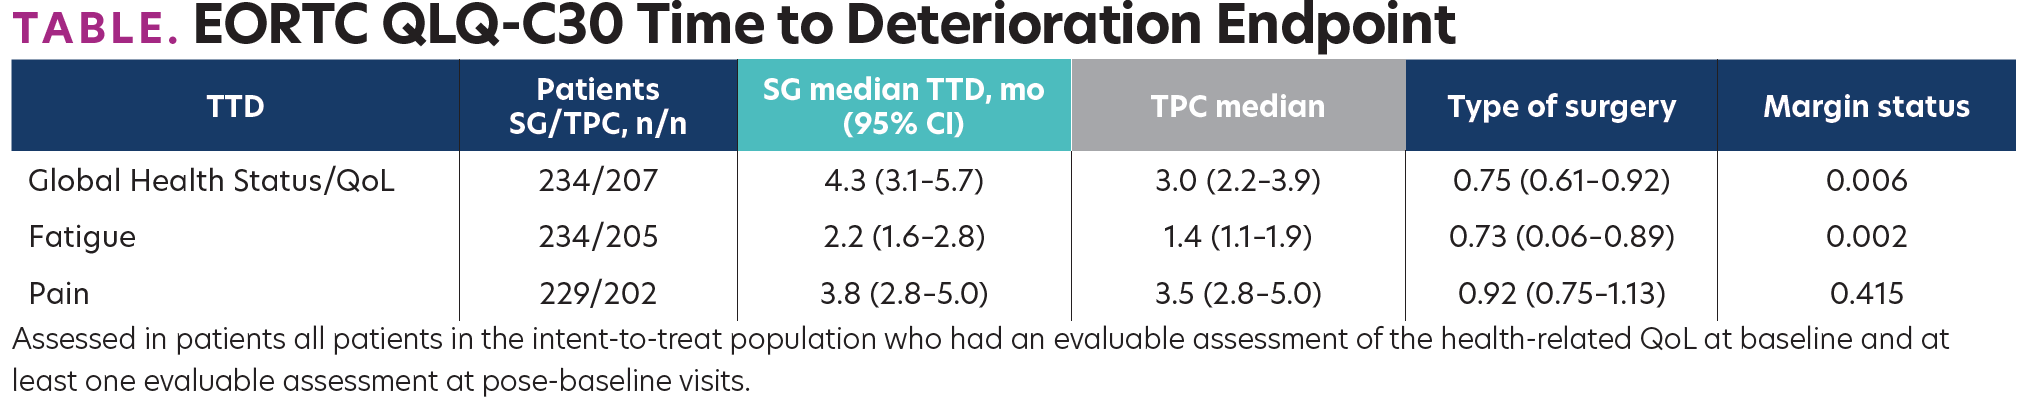 TABLE. EORTC QLQ-C30 Time to Deterioration Endpoint